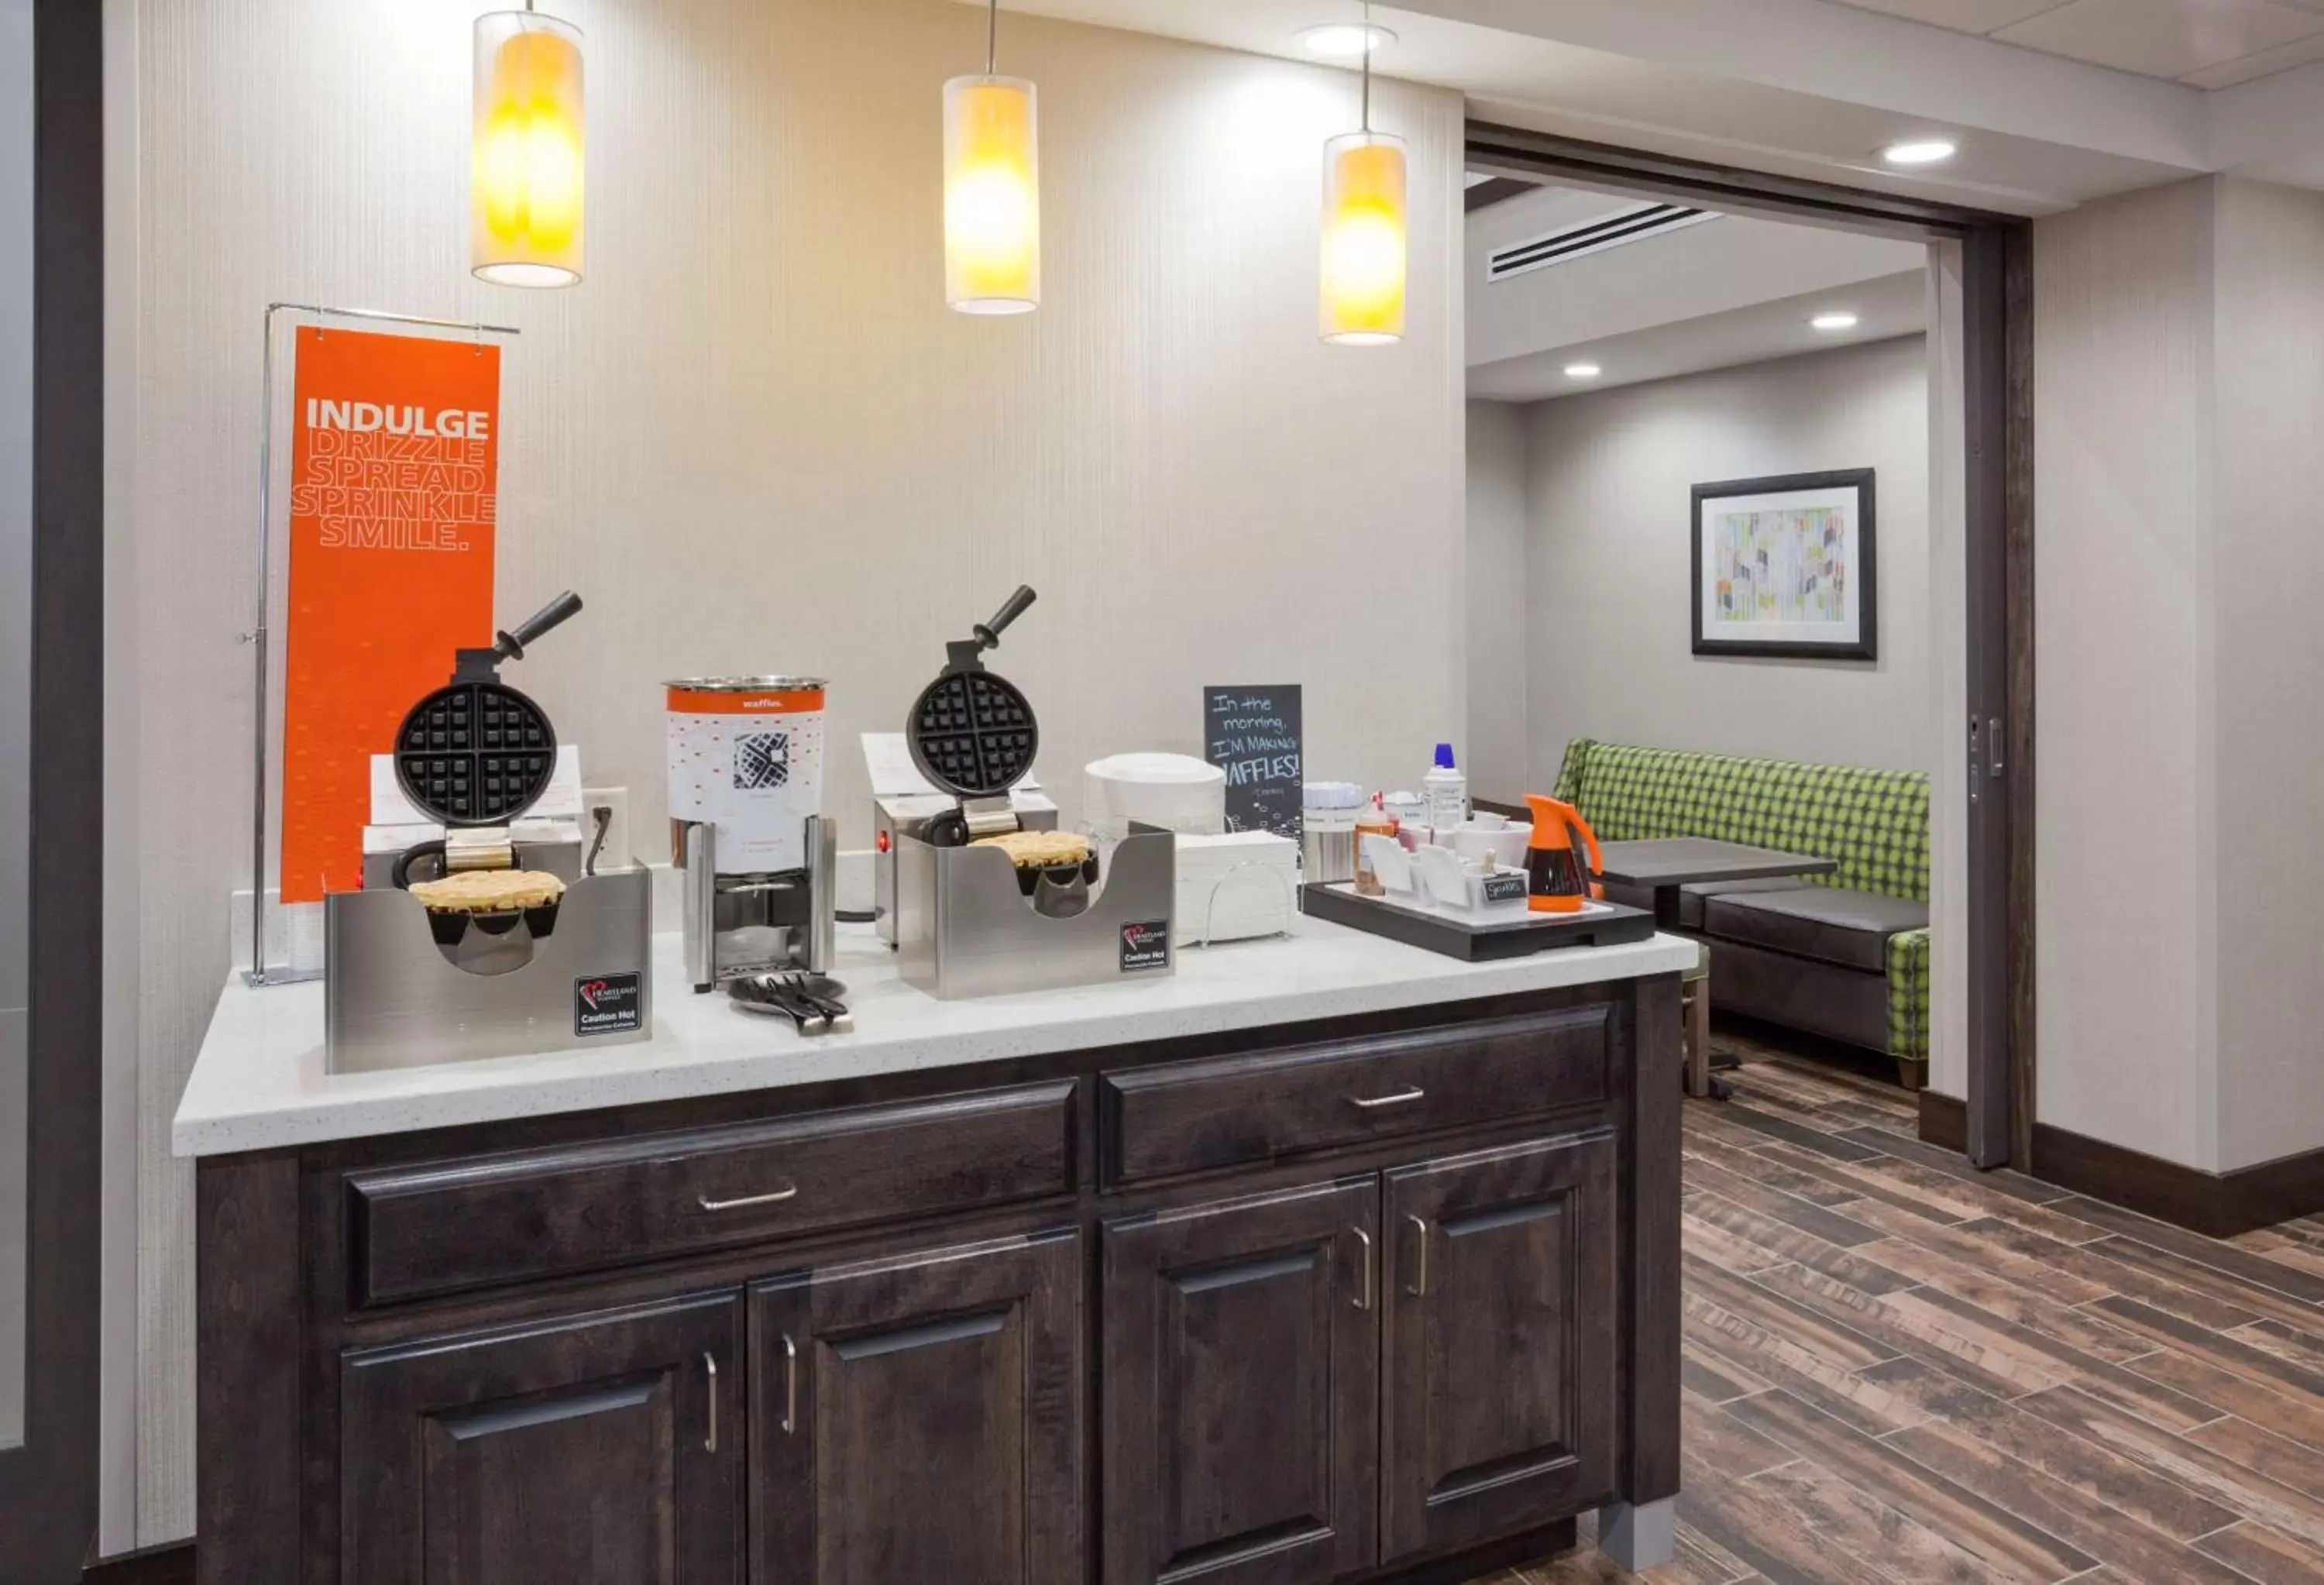 Dining area in Hampton Inn & Suites Sioux City South, IA